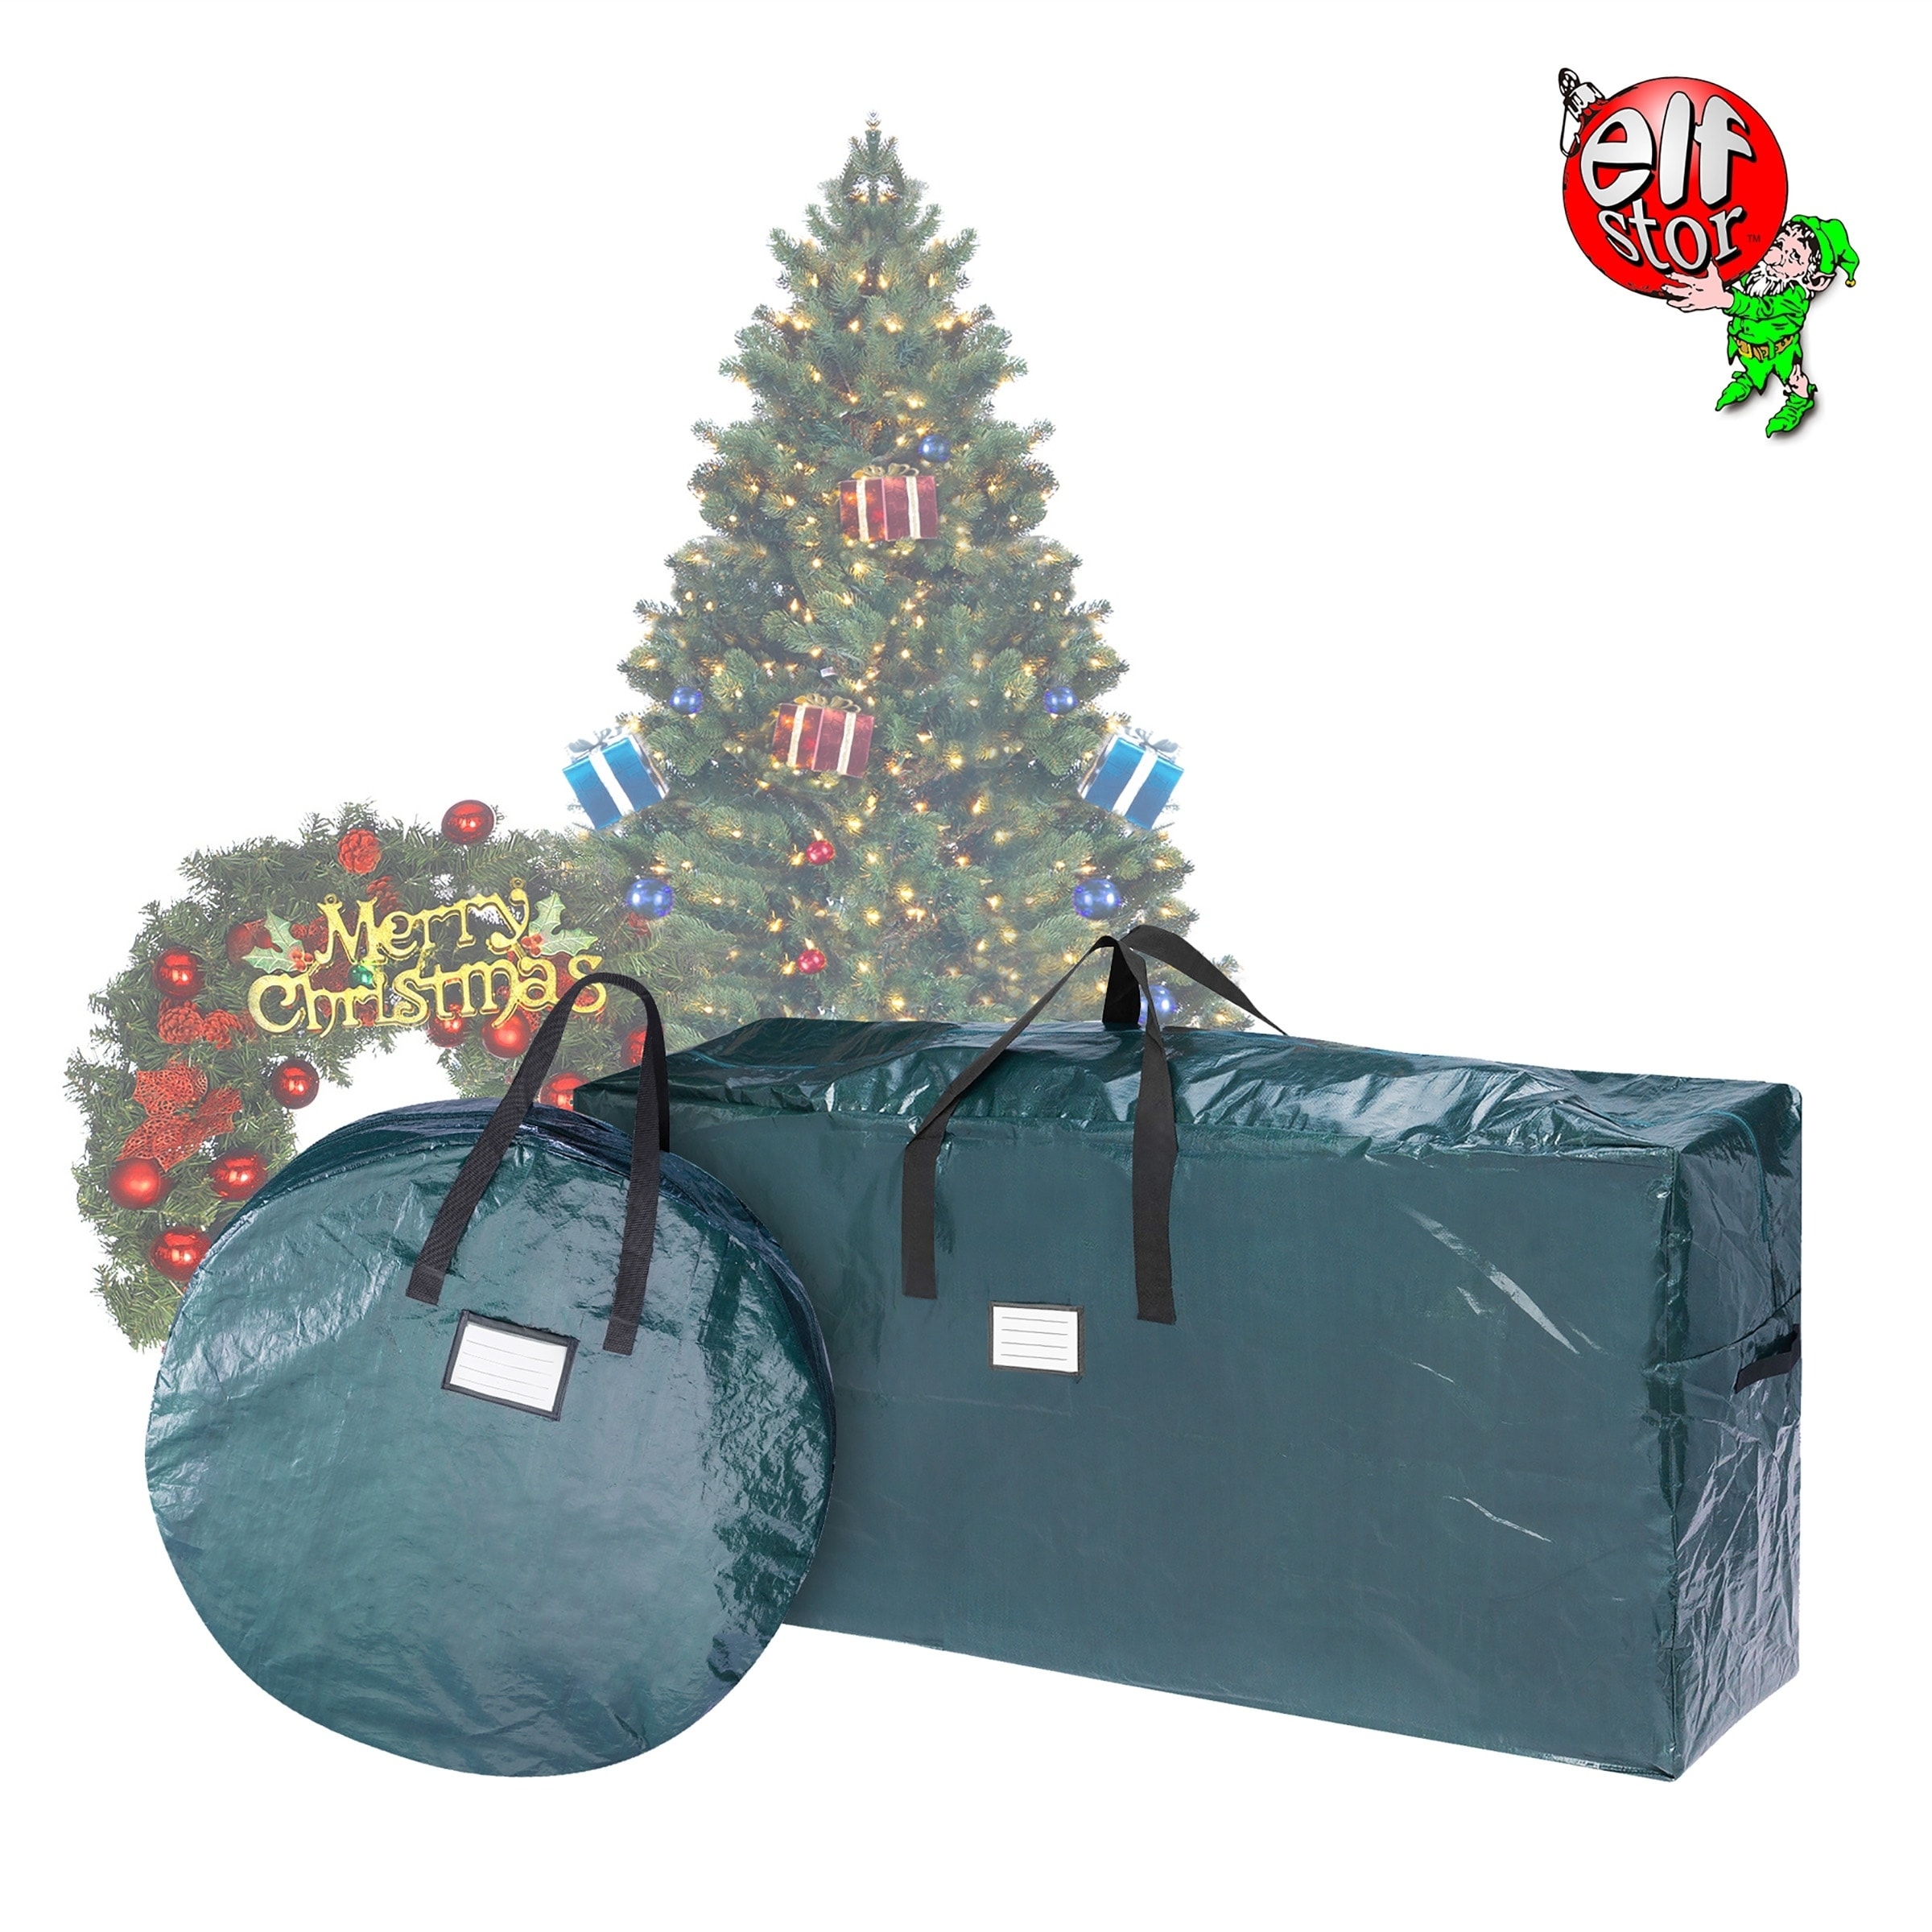 Elf Stor Deluxe Red Christmas Tree Storage Bag & Canvas 30 Inch Wreath Bag by Elf Stor 